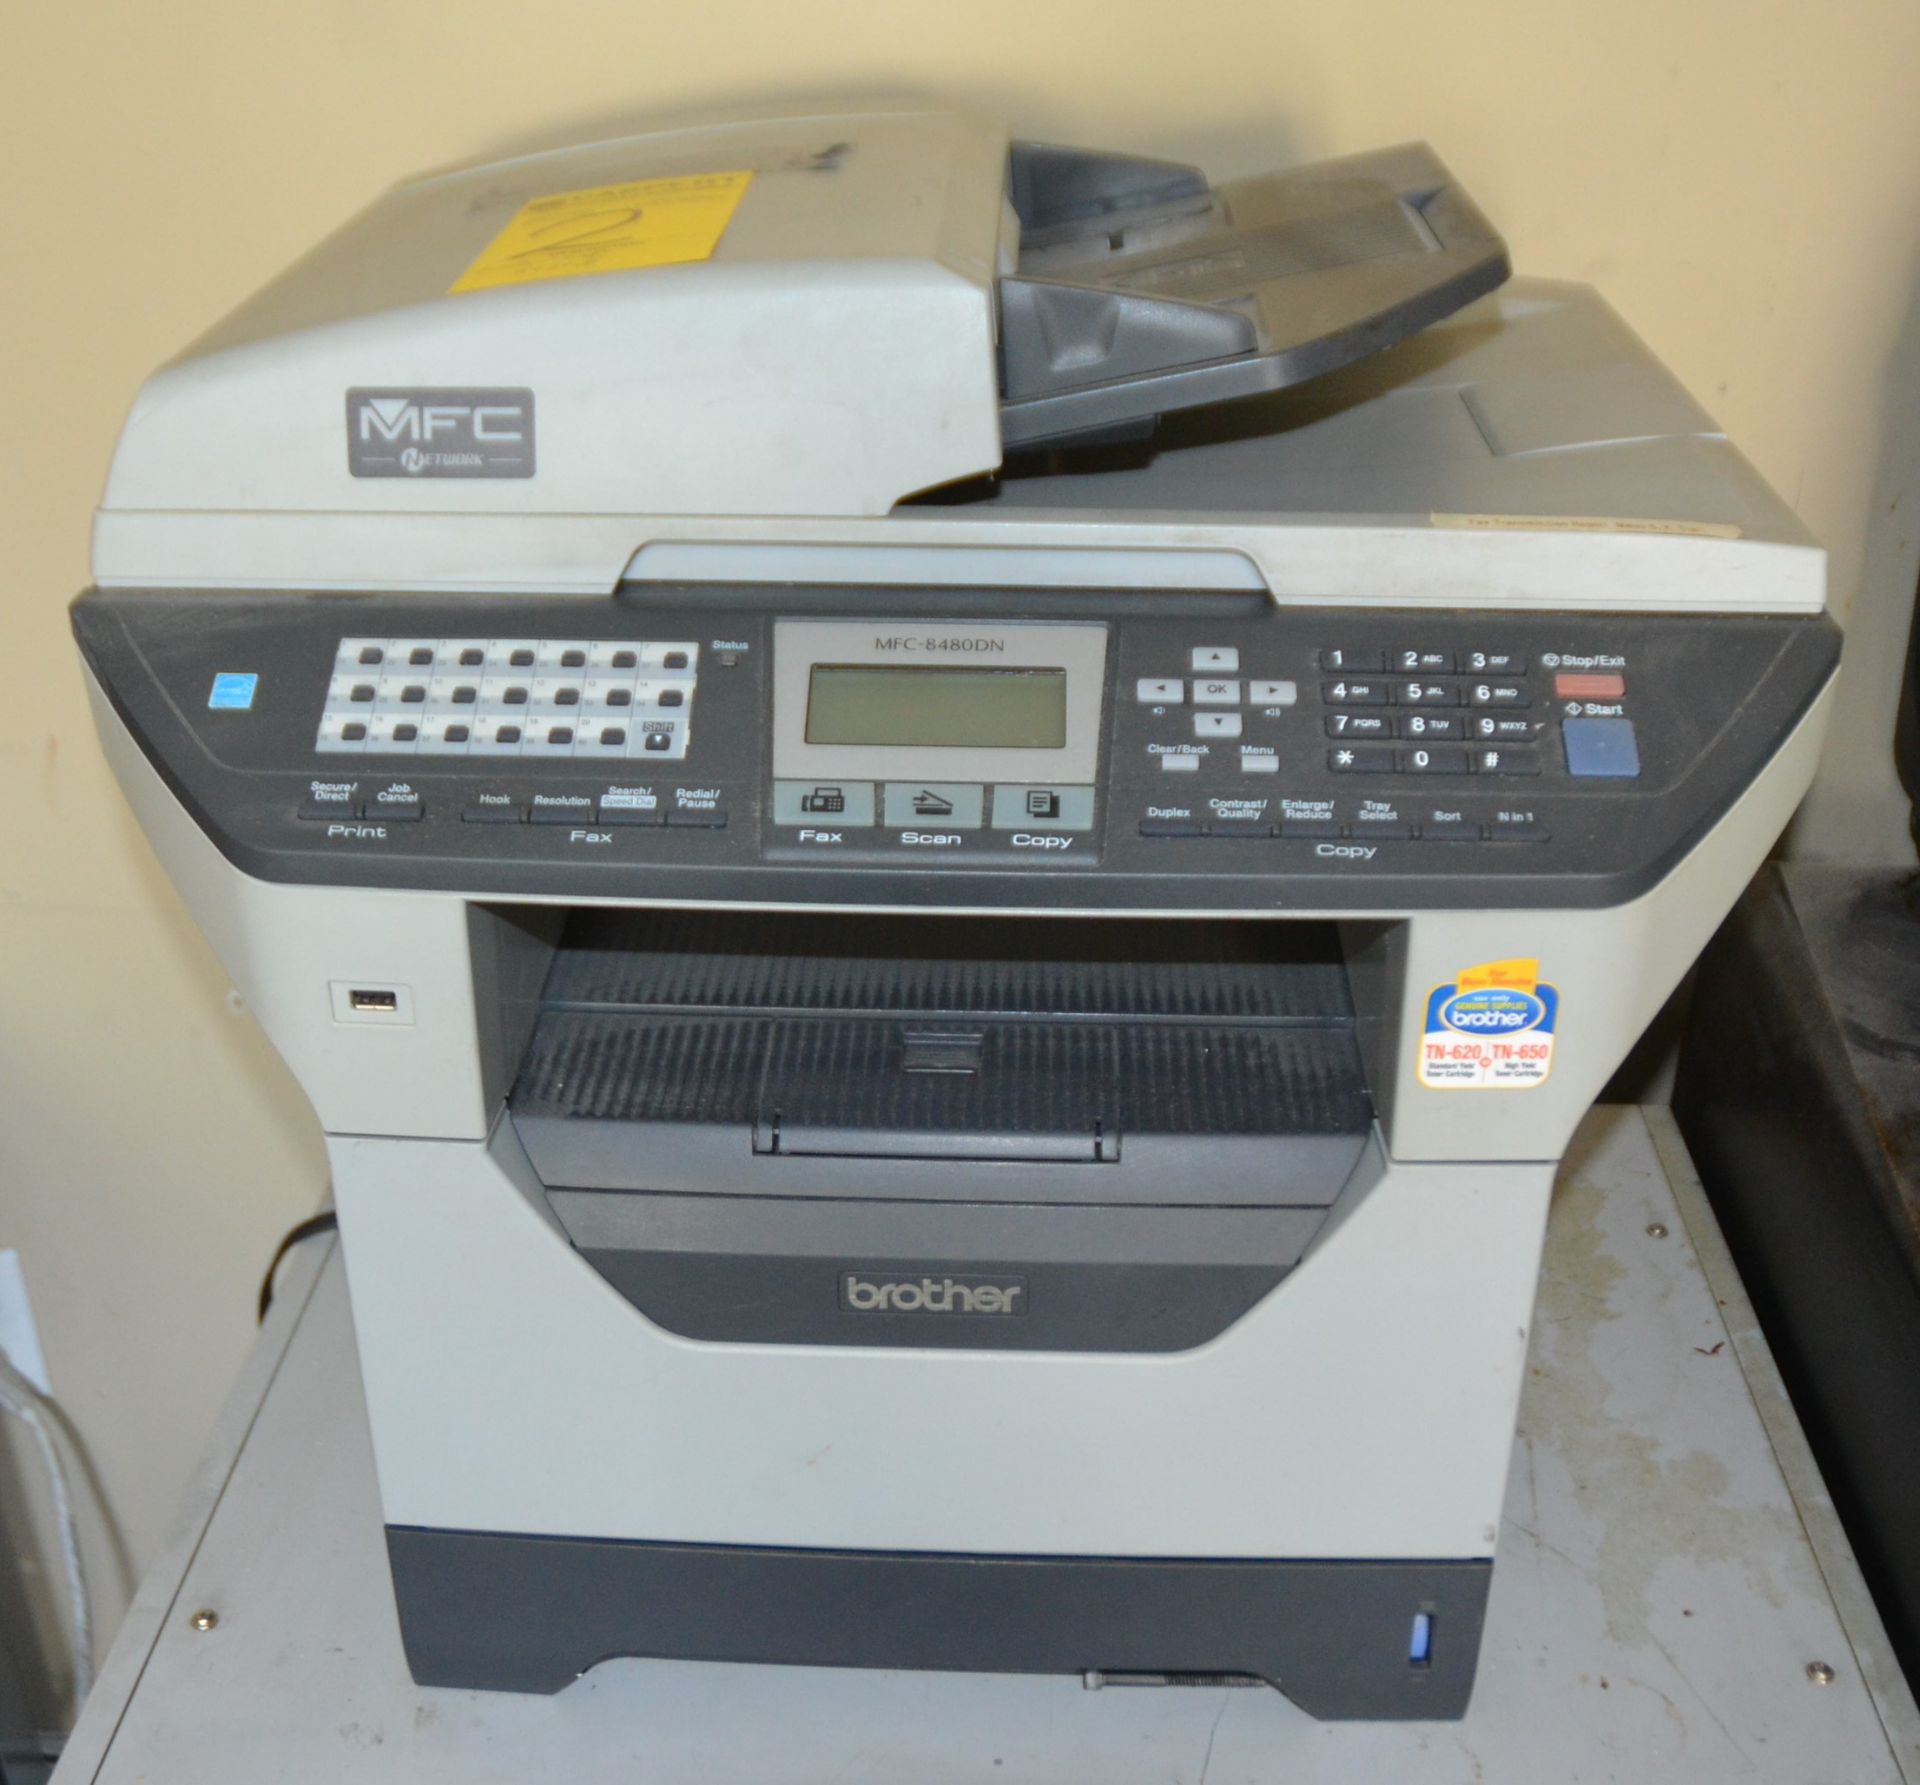 Brother MFC-8480dn All-In-One